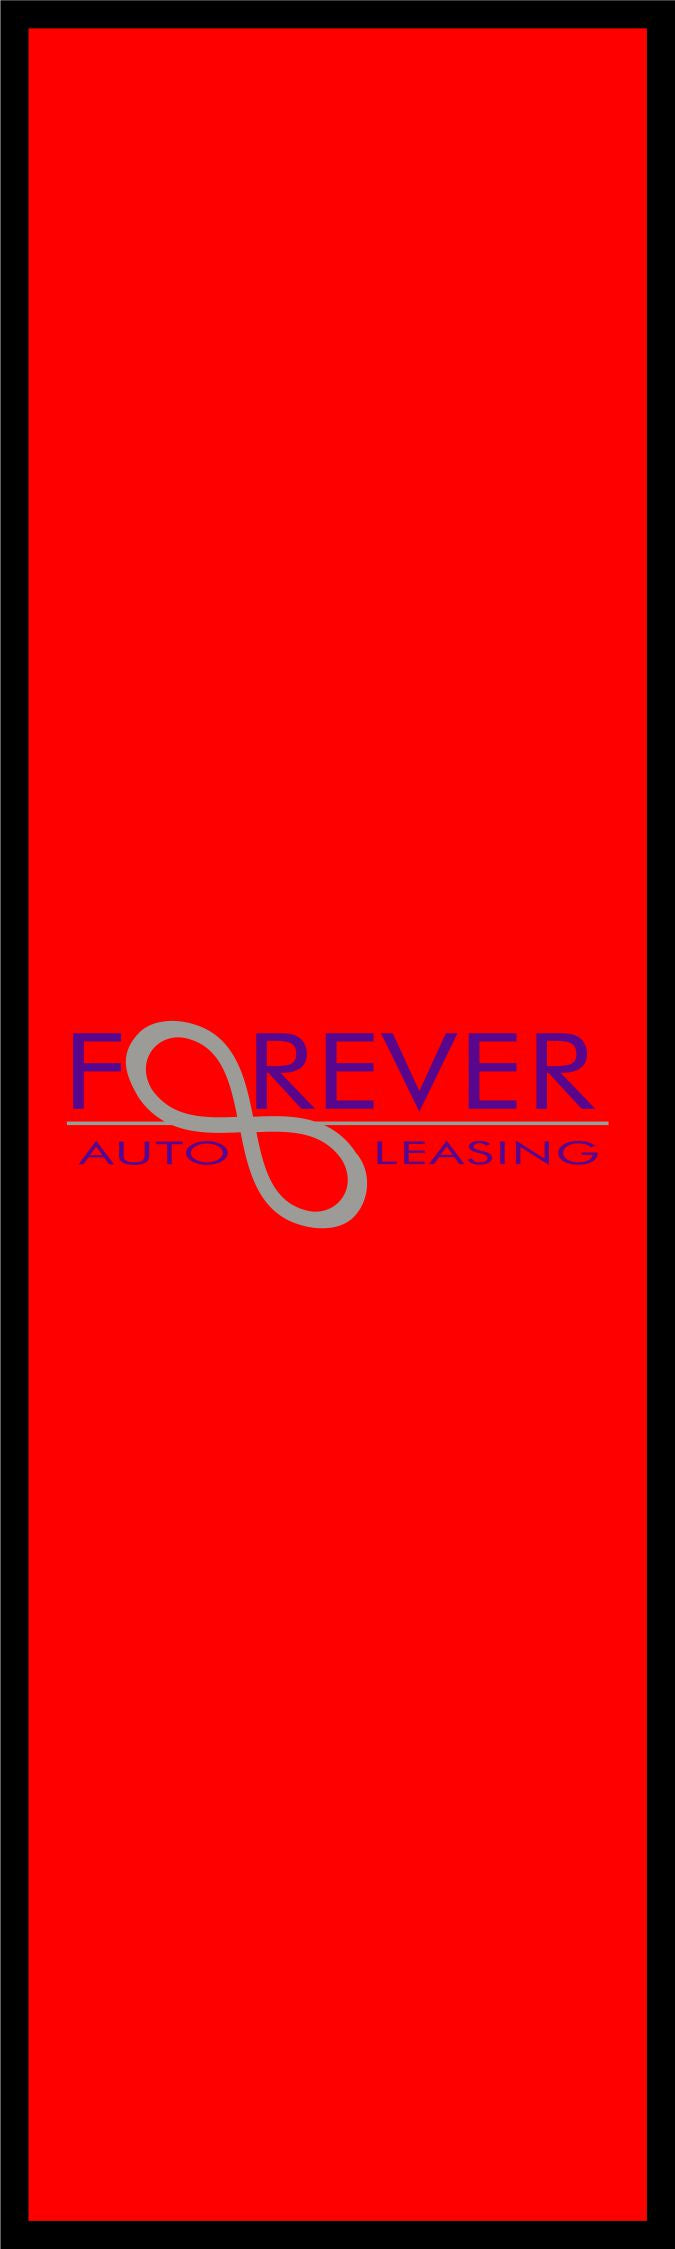 Forever Autos 3 x 10 Luxury Berber Inlay - The Personalized Doormats Company